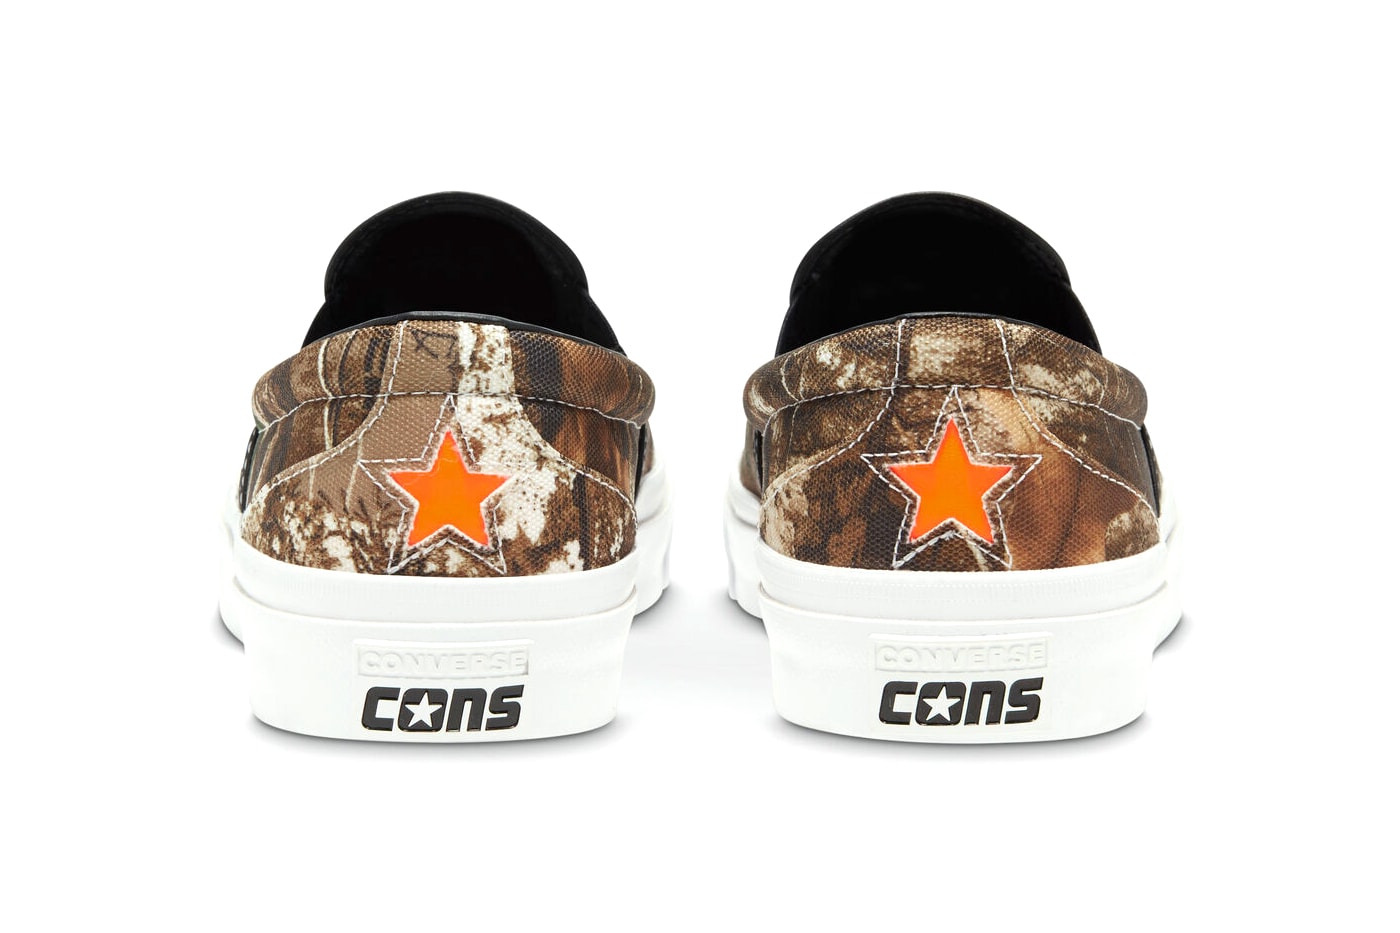 Converse One Star Slip Pro Realtree menswear streetwear spring summer 2020 collection ss20 shoes sneakers kicks slipons runners trainers